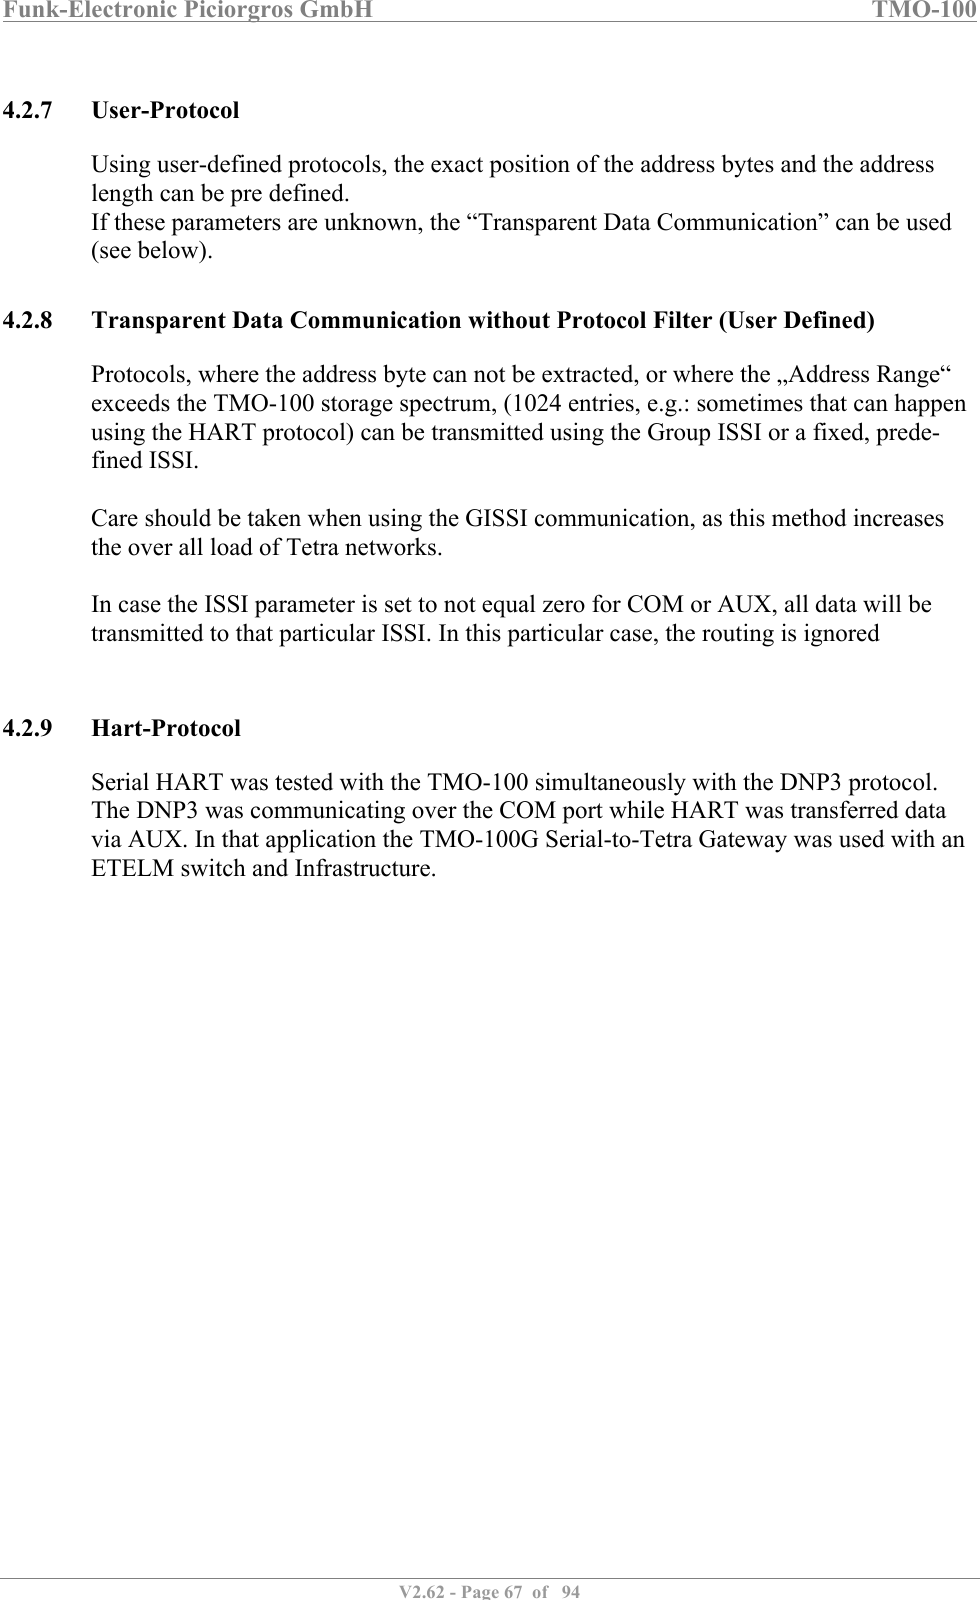 Funk-Electronic Piciorgros GmbH   TMO-100   V2.62 - Page 67  of   94   4.2.7 User-Protocol Using user-defined protocols, the exact position of the address bytes and the address length can be pre defined. If these parameters are unknown, the “Transparent Data Communication” can be used (see below).  4.2.8 Transparent Data Communication without Protocol Filter (User Defined) Protocols, where the address byte can not be extracted, or where the „Address Range“ exceeds the TMO-100 storage spectrum, (1024 entries, e.g.: sometimes that can happen using the HART protocol) can be transmitted using the Group ISSI or a fixed, prede-fined ISSI.  Care should be taken when using the GISSI communication, as this method increases the over all load of Tetra networks.  In case the ISSI parameter is set to not equal zero for COM or AUX, all data will be transmitted to that particular ISSI. In this particular case, the routing is ignored  4.2.9 Hart-Protocol Serial HART was tested with the TMO-100 simultaneously with the DNP3 protocol. The DNP3 was communicating over the COM port while HART was transferred data via AUX. In that application the TMO-100G Serial-to-Tetra Gateway was used with an ETELM switch and Infrastructure.   